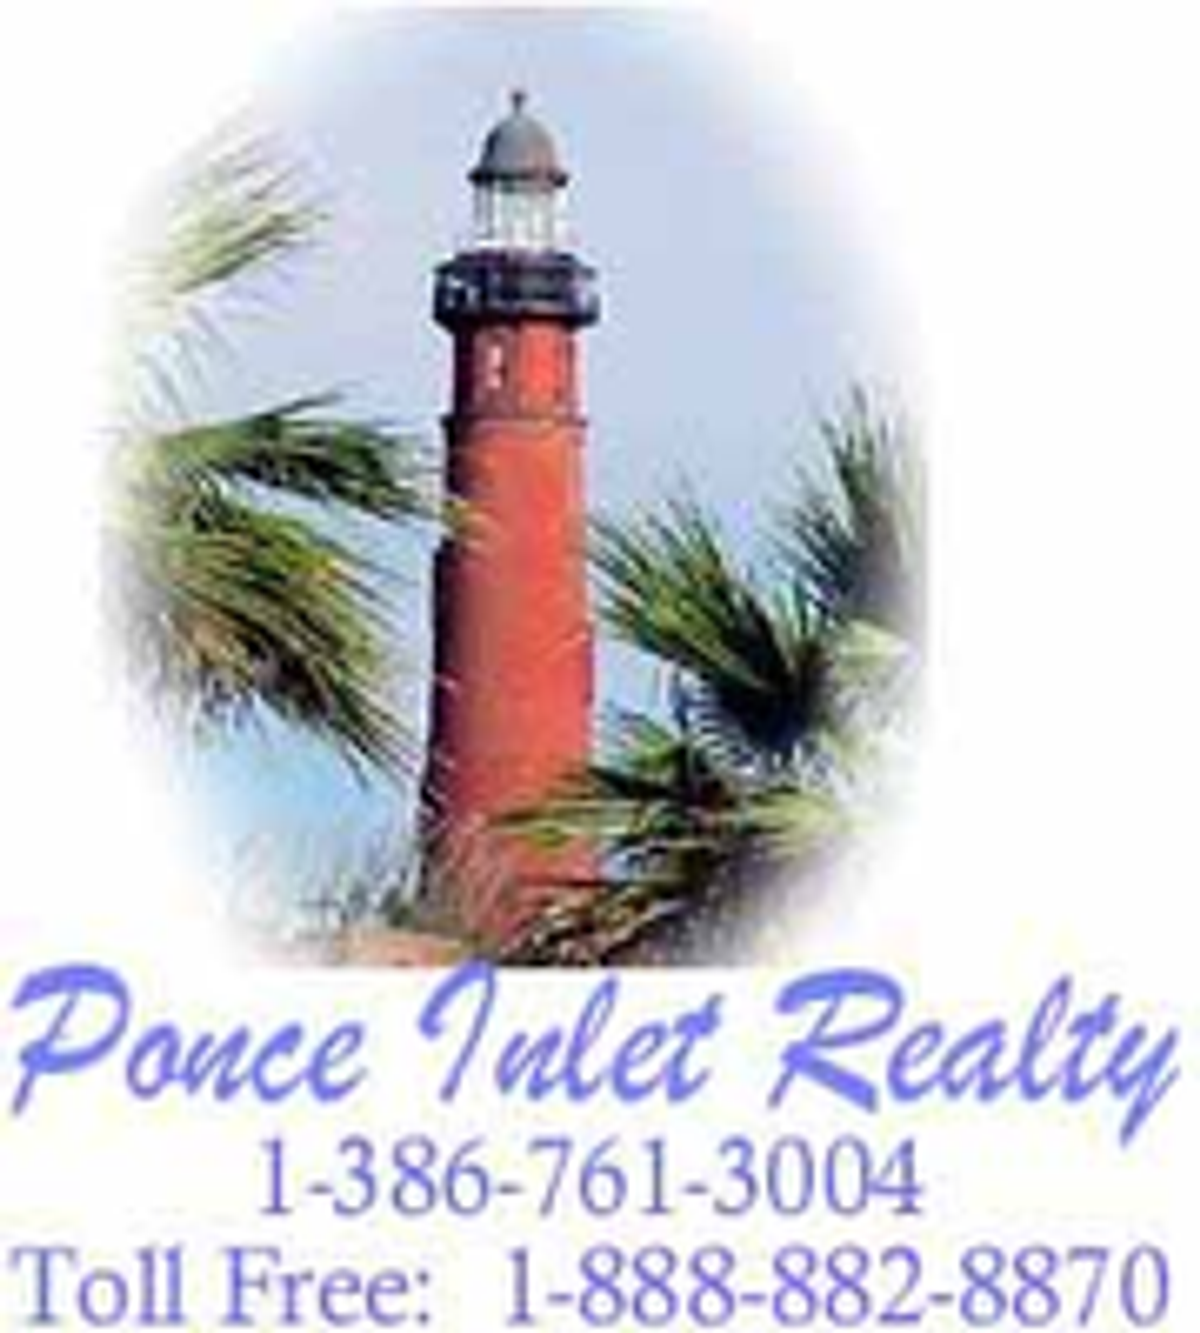 Photo for Kevin Luby, Listing Agent at Ponce Inlet Realty, Inc